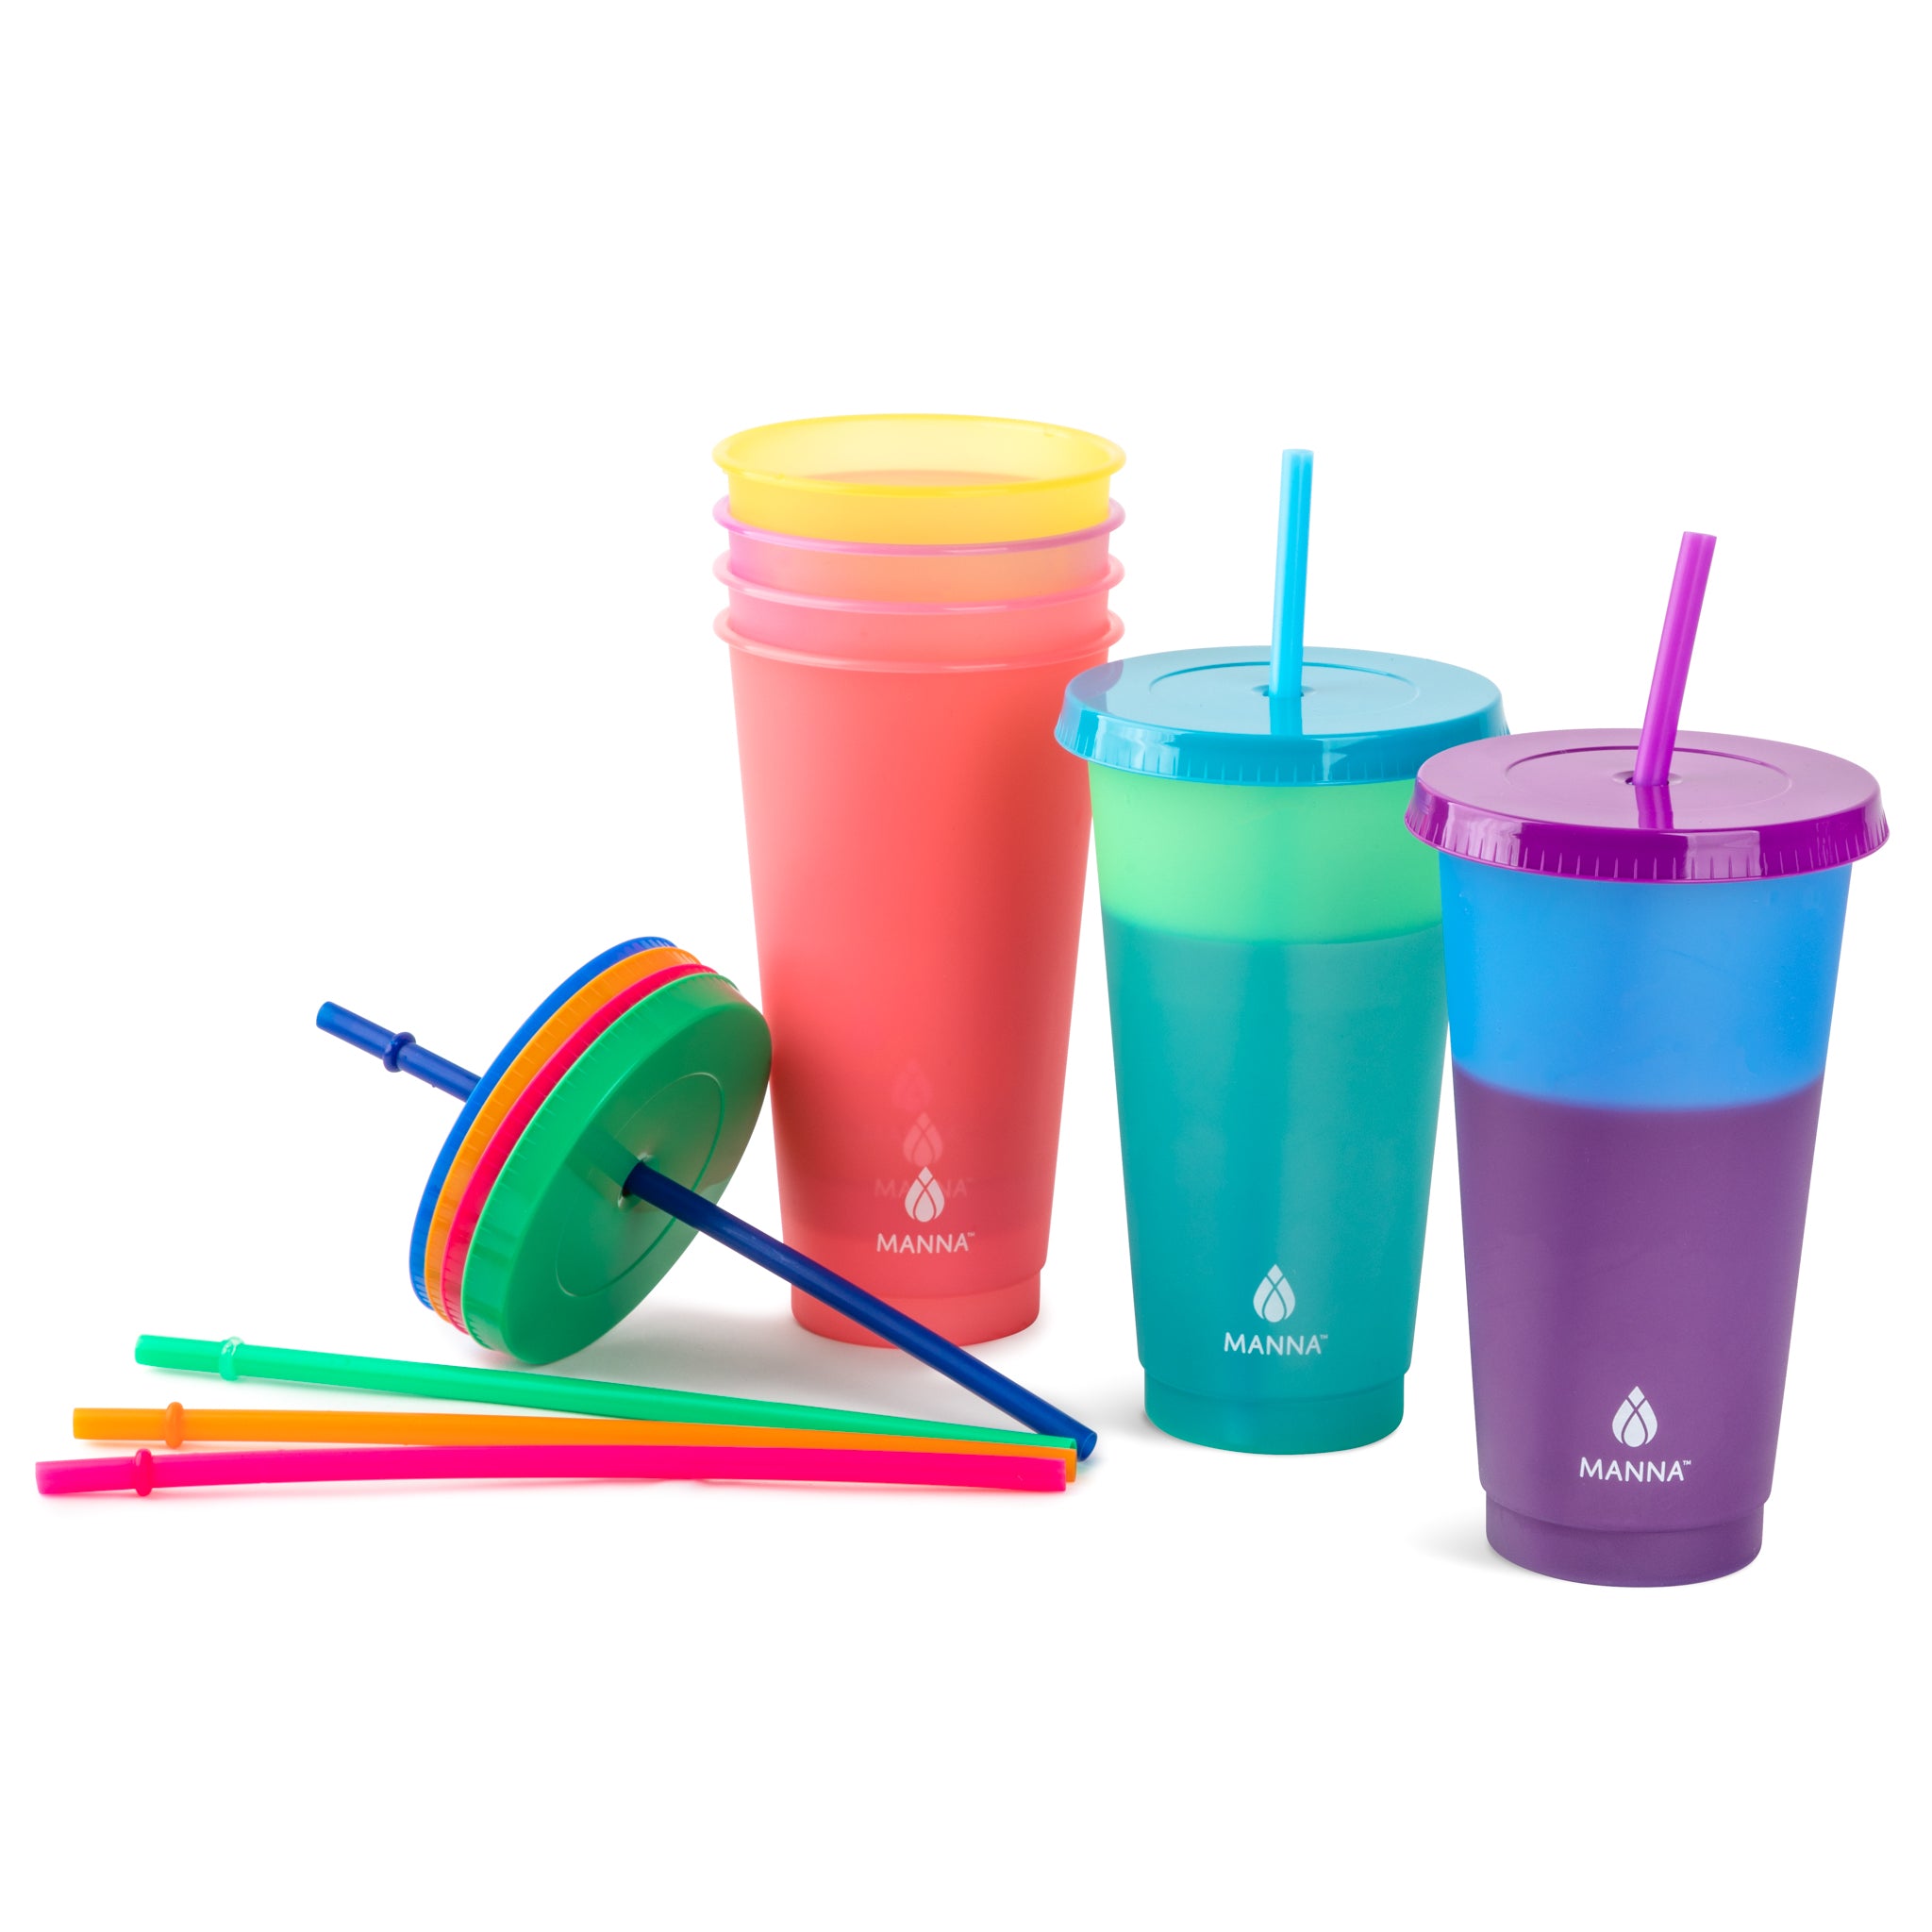 MANNA 4 Pack Color Changing Reusable Tumblers w/ Lids & Straw Set - 24oz  710mL